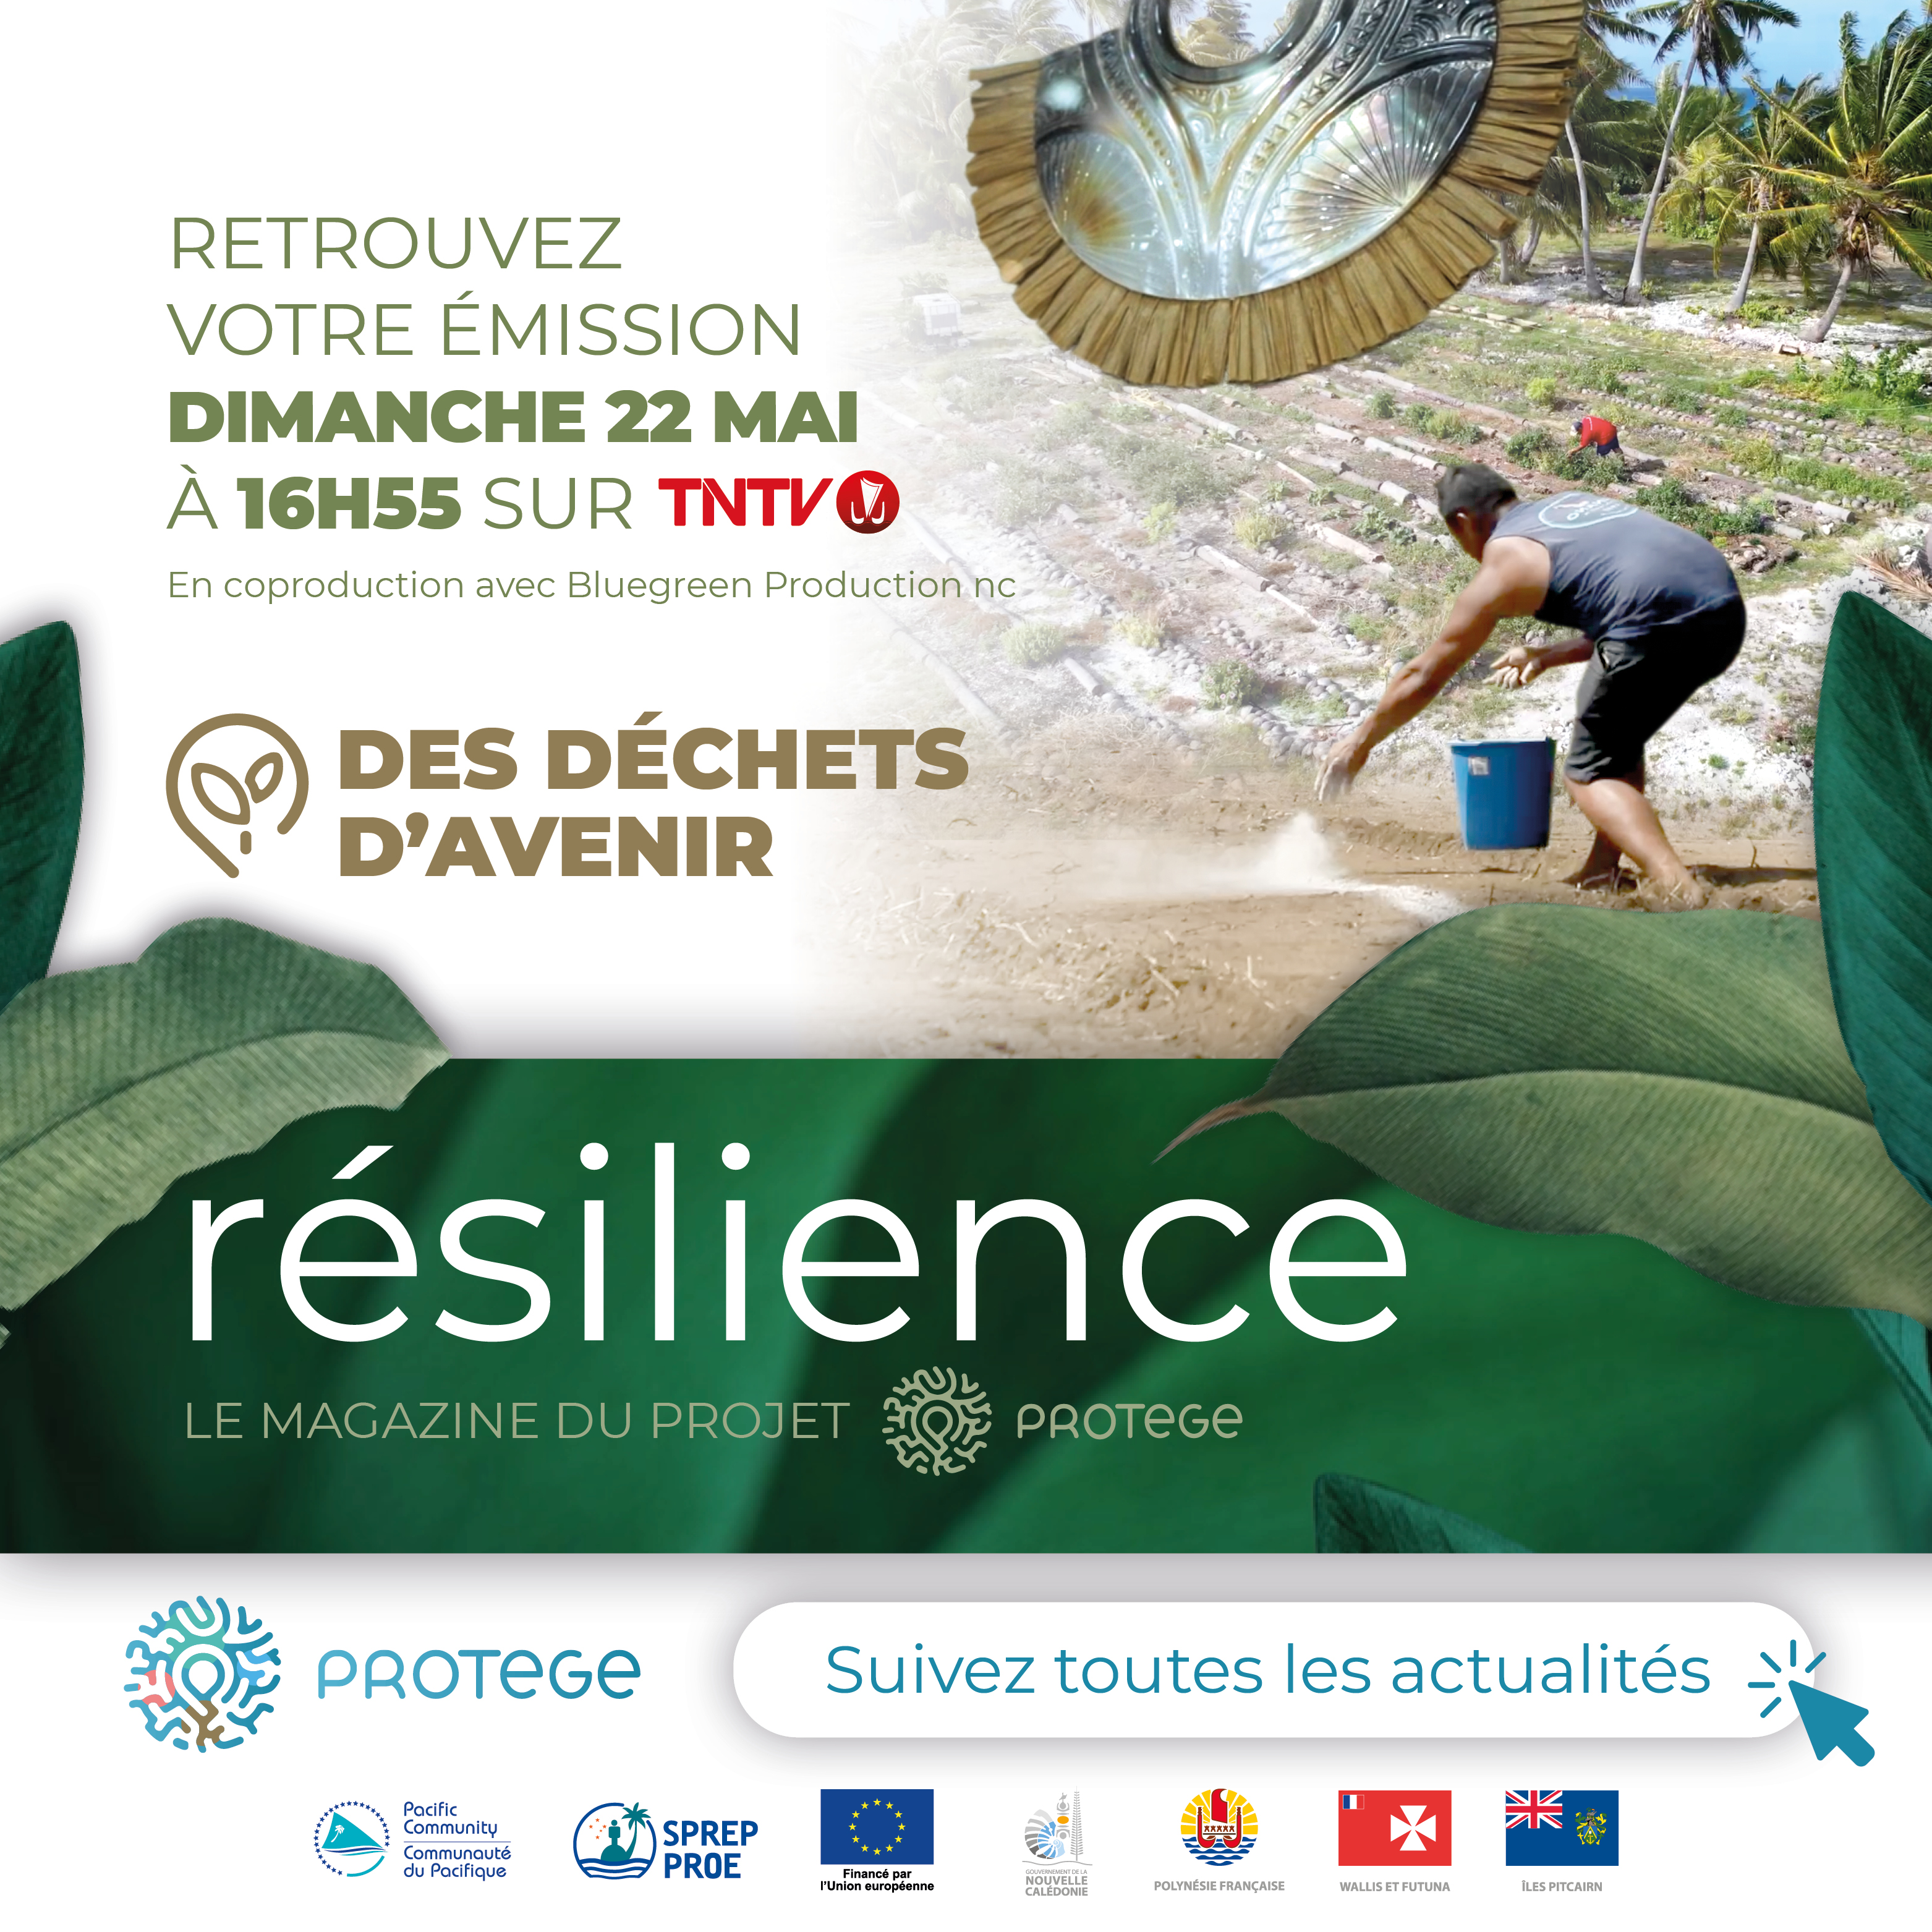 Episode 7 of "Resilience". TV magazine of PROTEGE project.